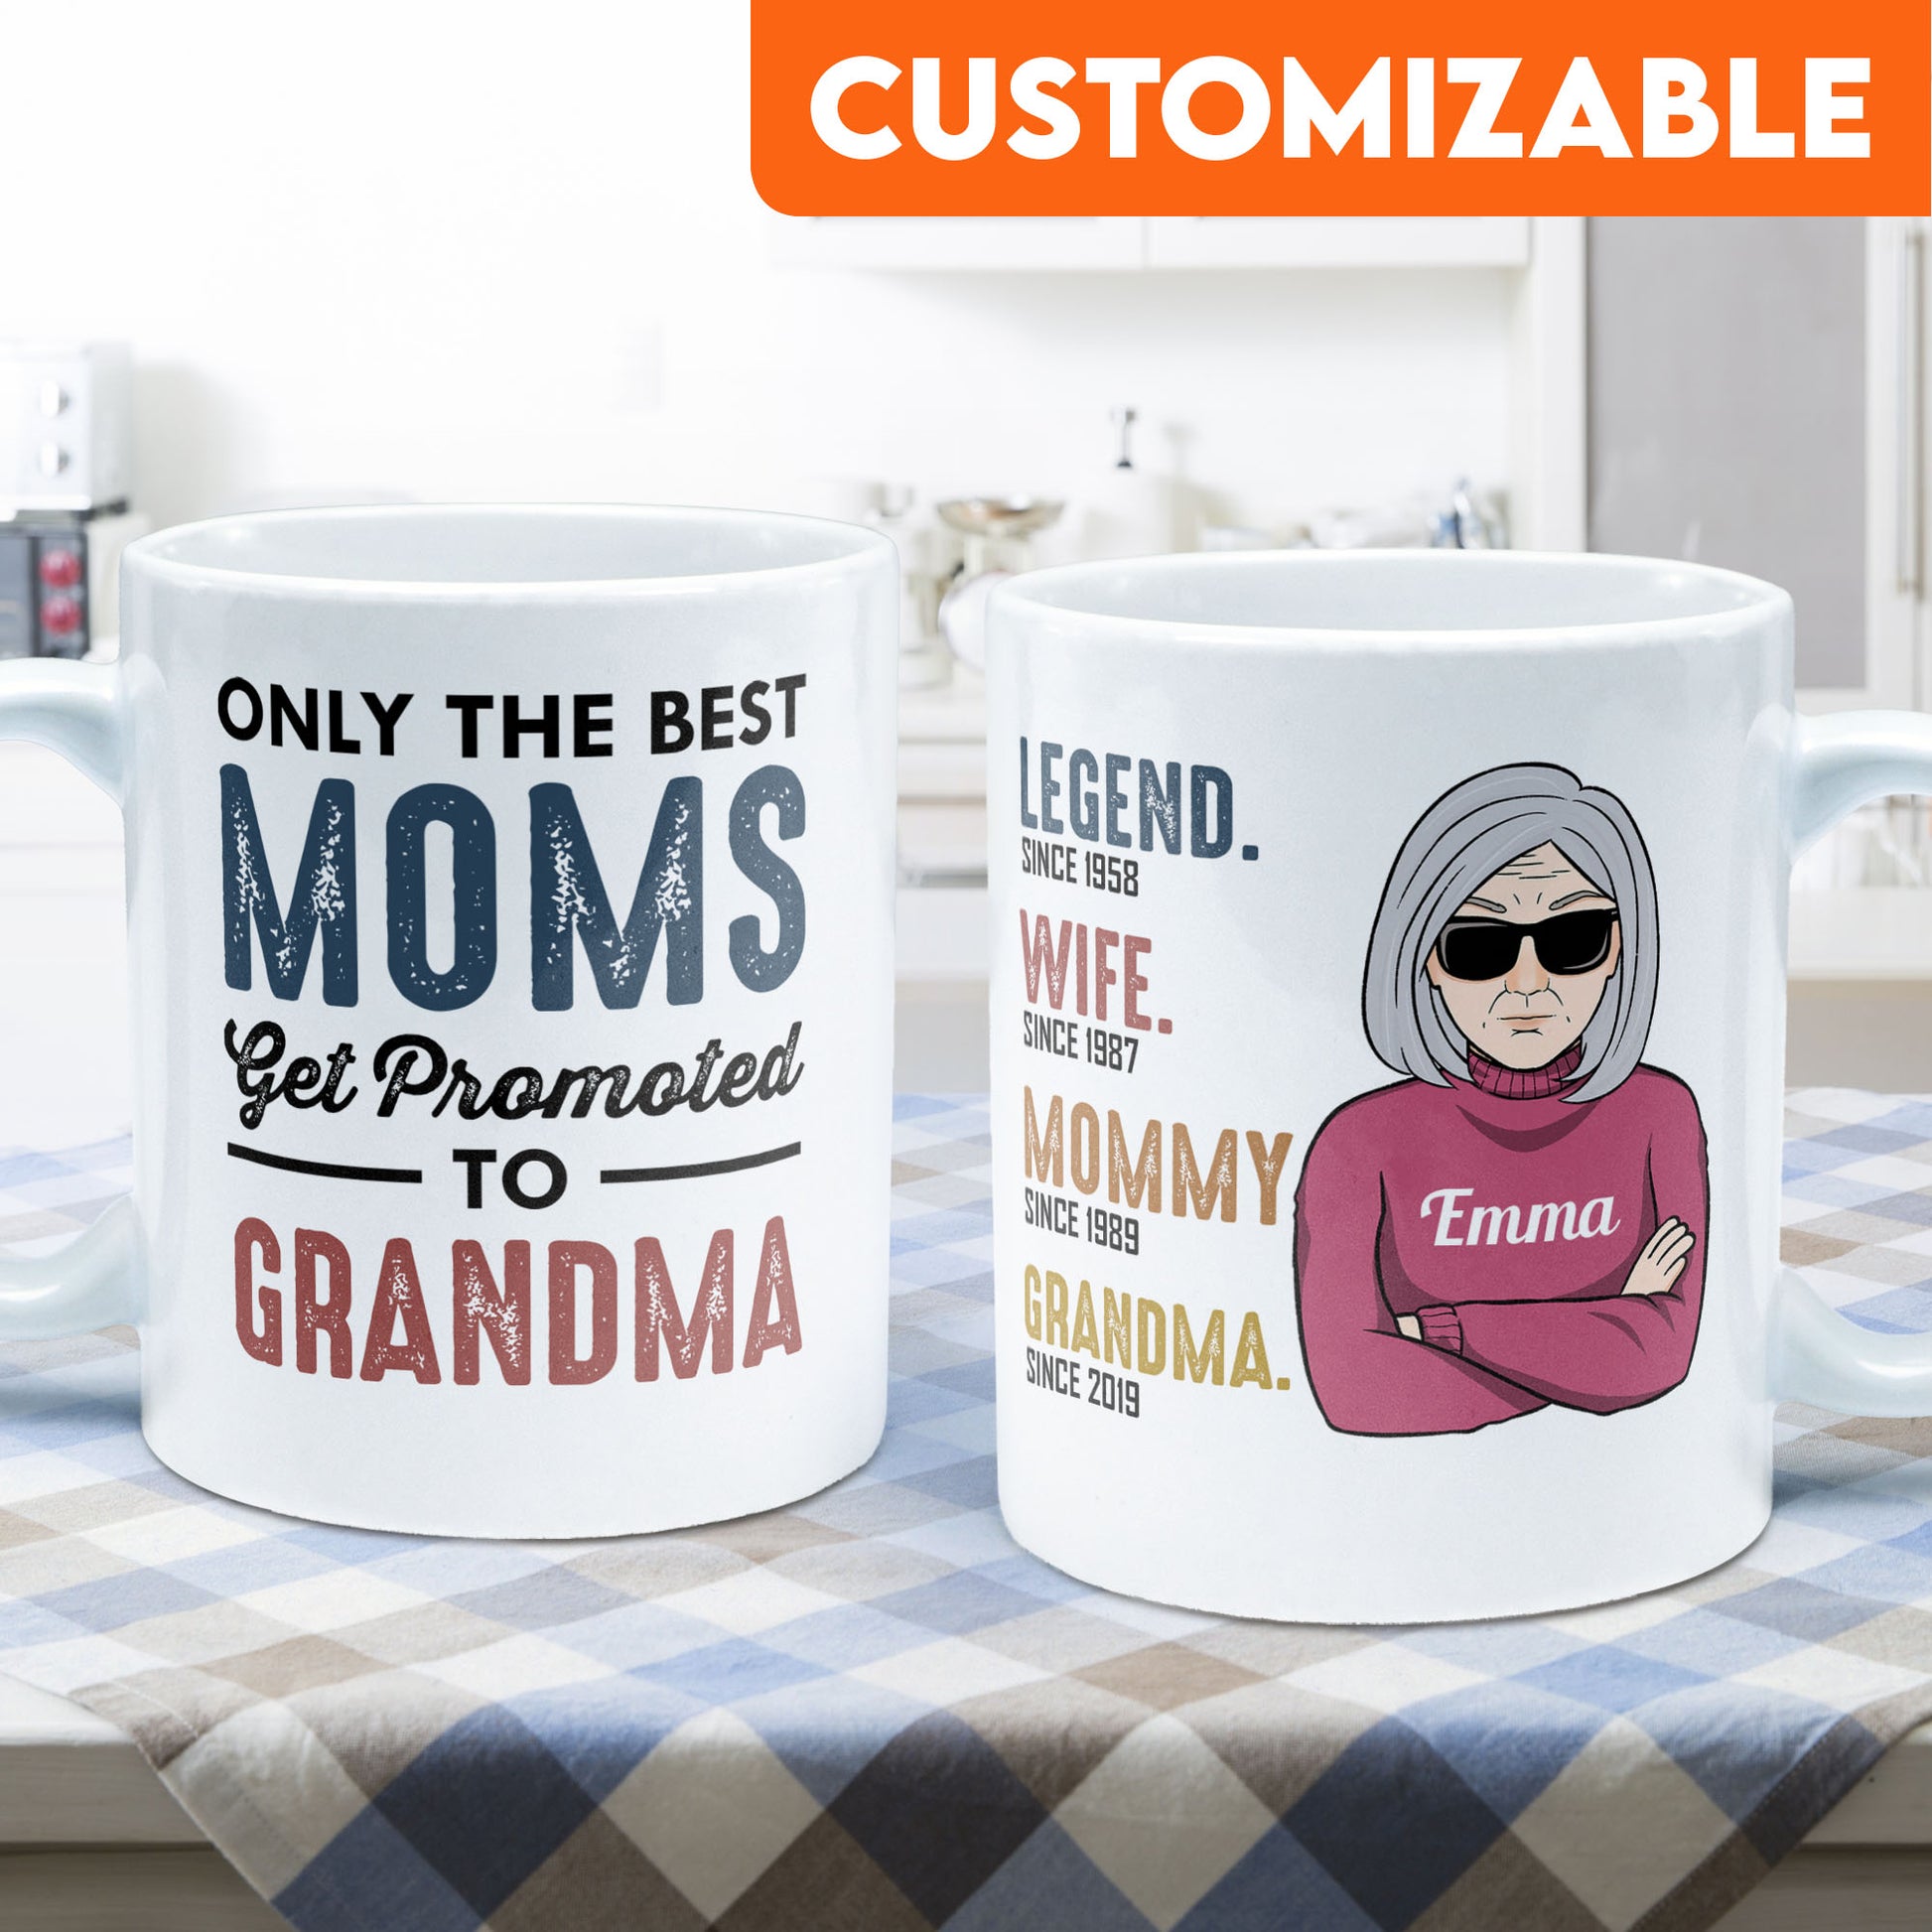 Only The Best Moms Get Promoted To Grandma - Personalized Mug - Birthday & Christmas Gift For Mom, Mother, Grandma, Nana, Mama